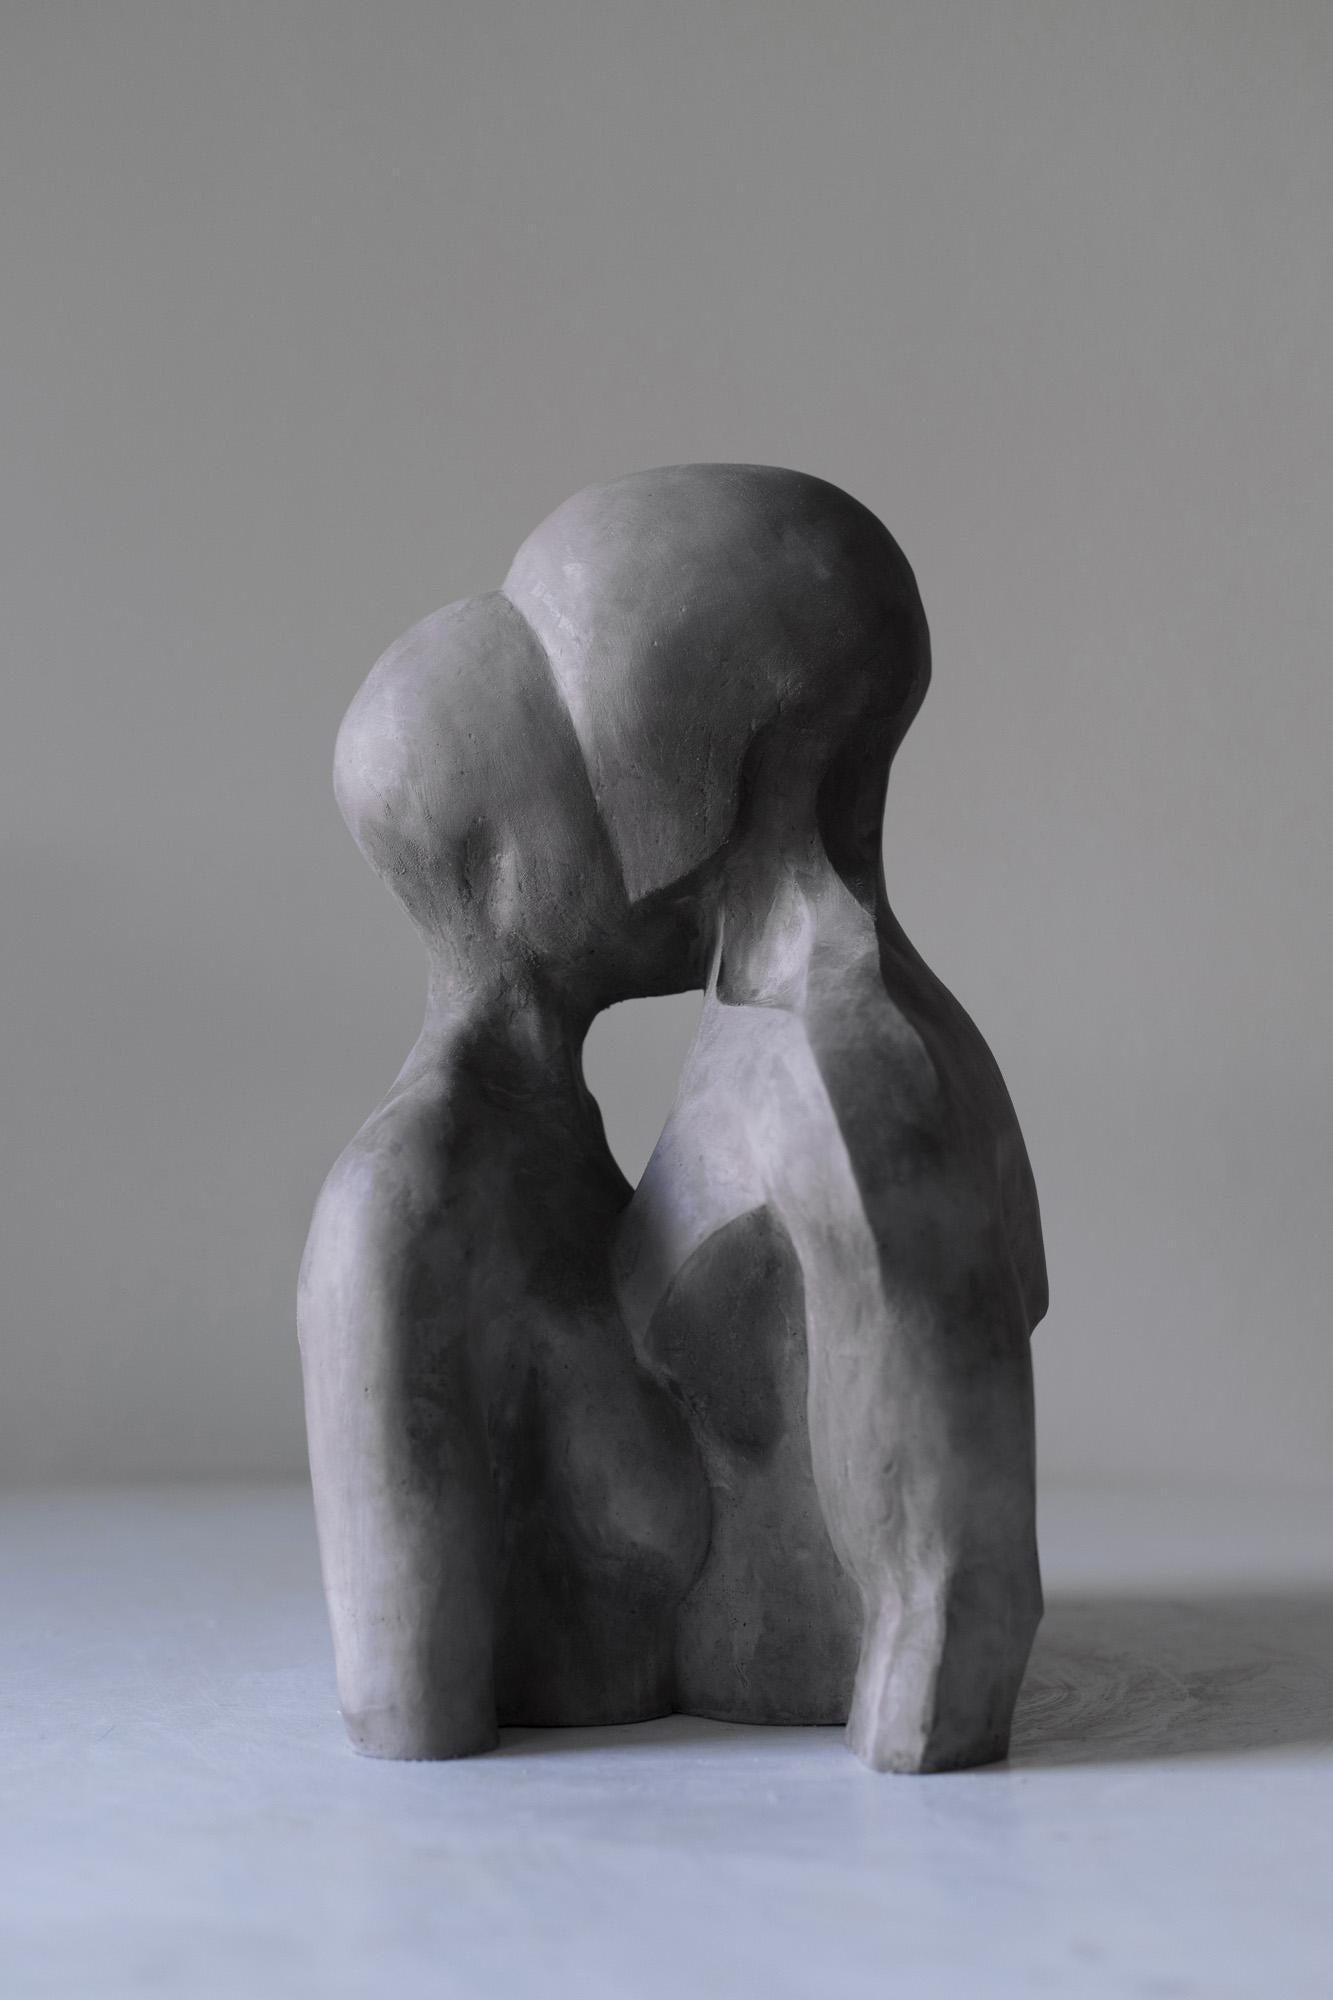 Boolean
7 x 13 x 9 inches, 15 lbs
Concrete

Artist's Commentary:         
This sculpture is about deep connection between woman and man

About the Artist: 
In his work Peter is telling the story about himself, his wife and his past. His sculptures